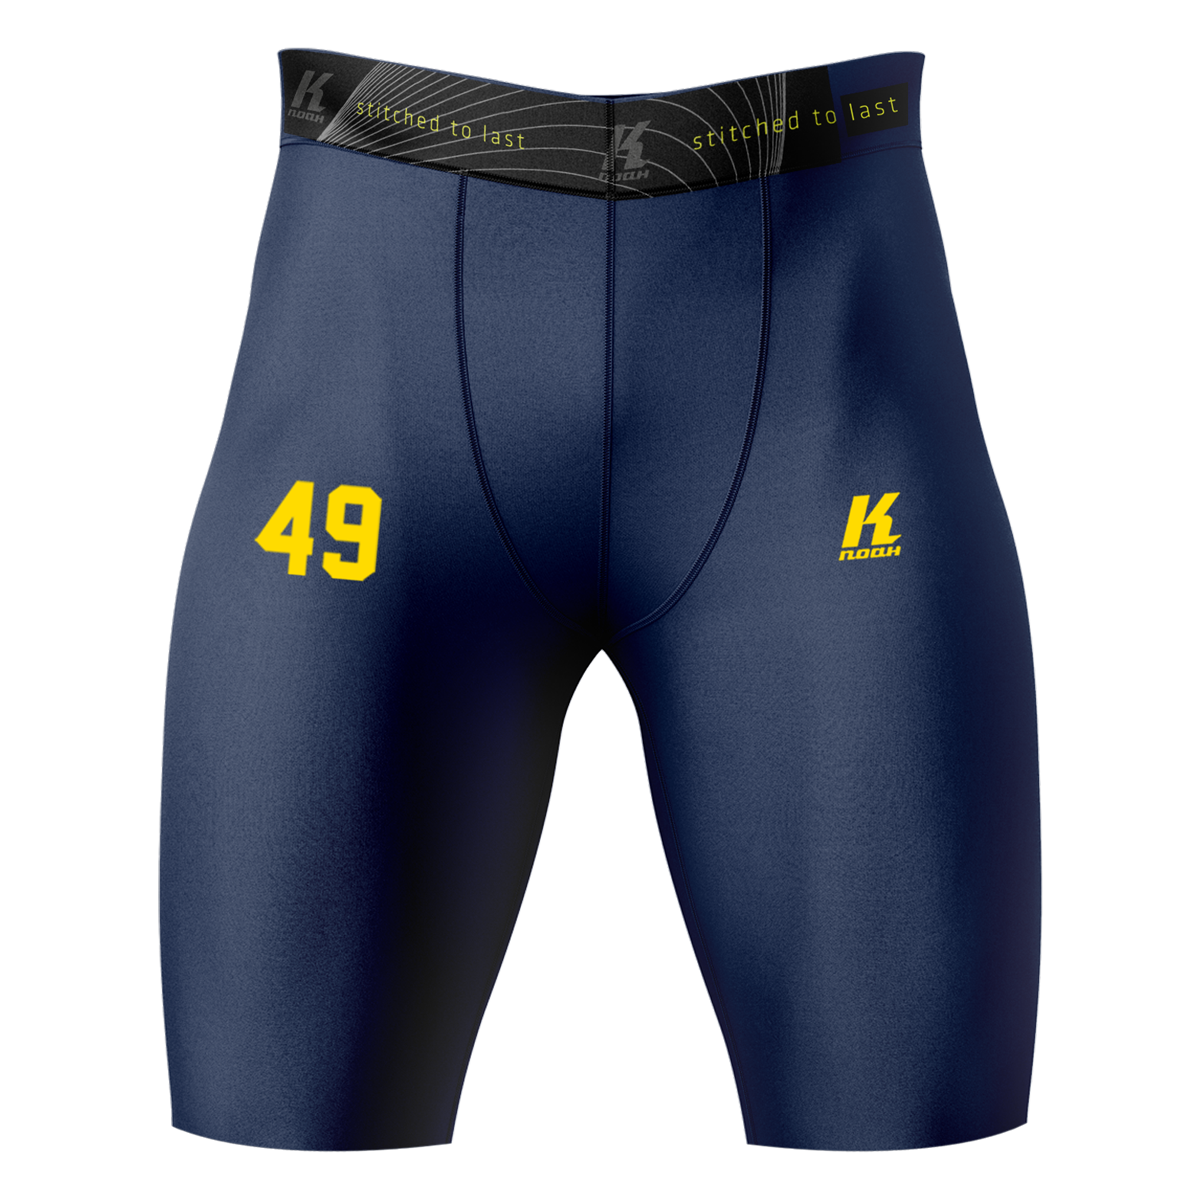 HSC K.Tech Compression Short BA0512 with Playernumber/Initials